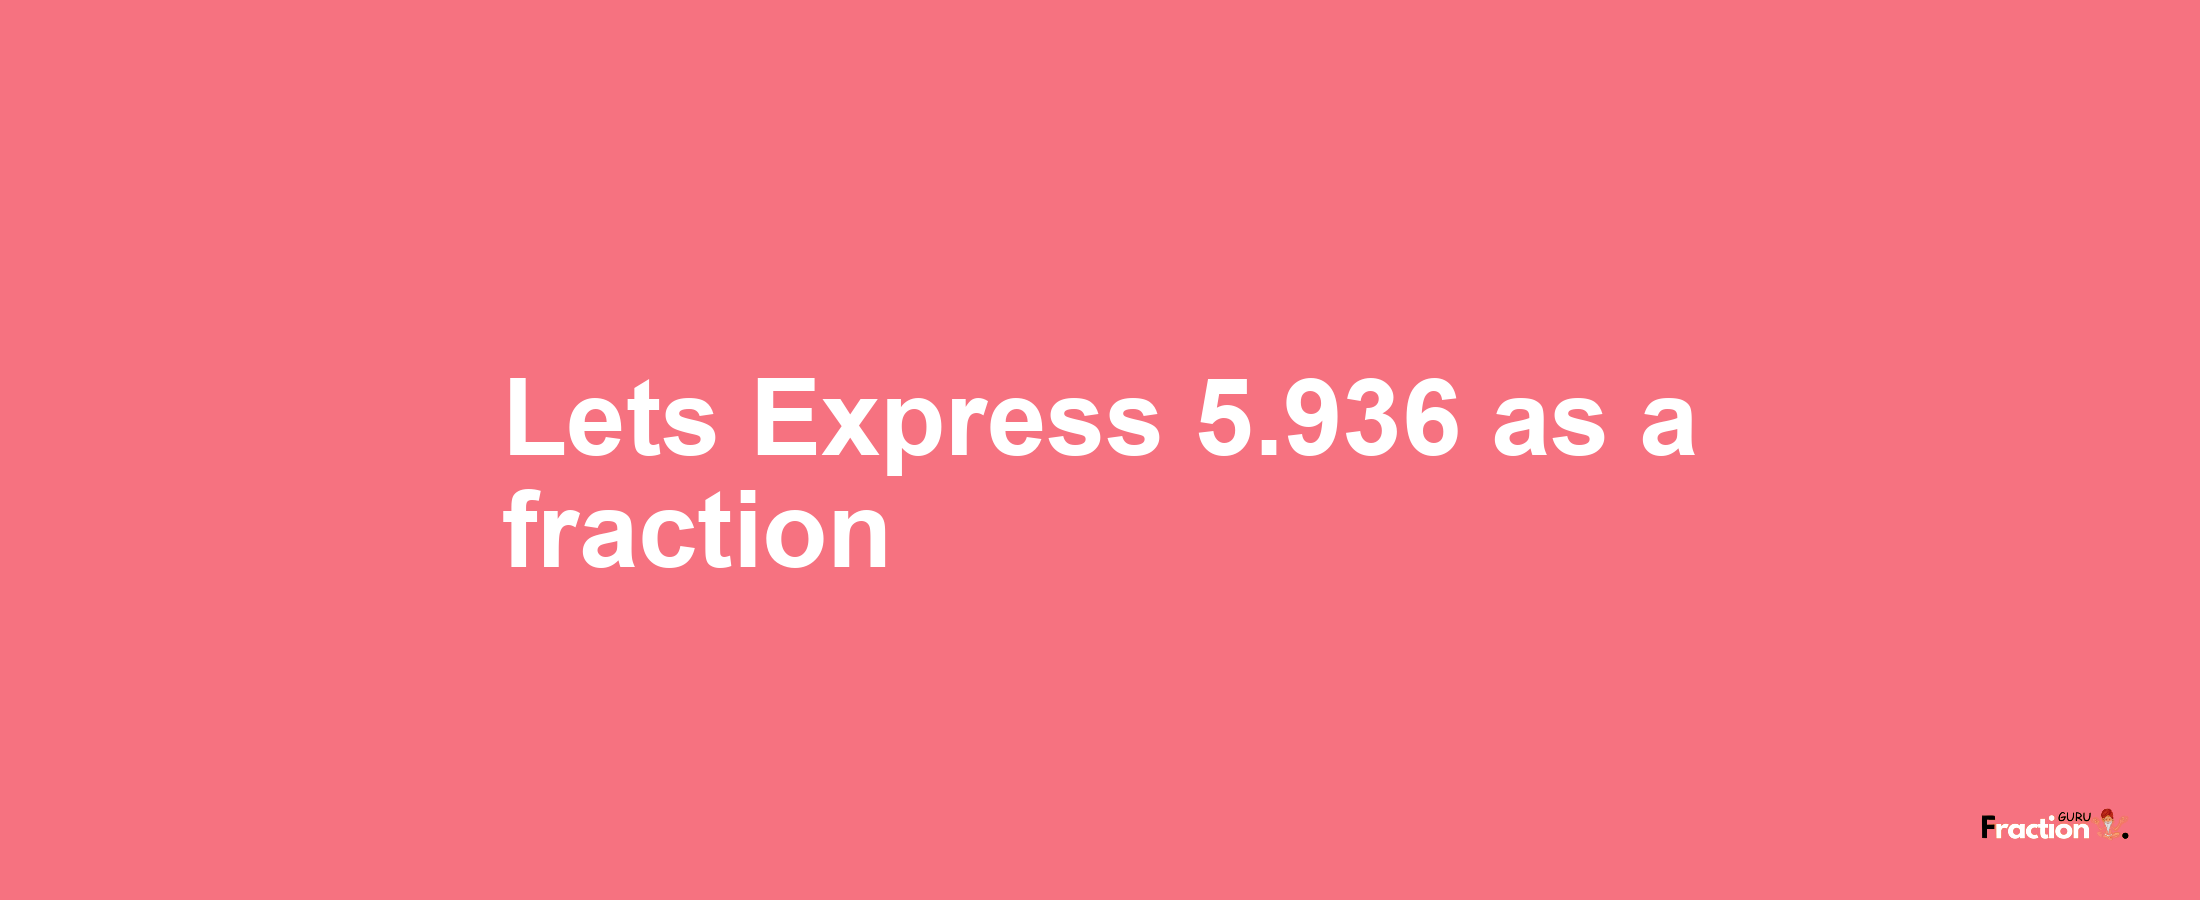 Lets Express 5.936 as afraction